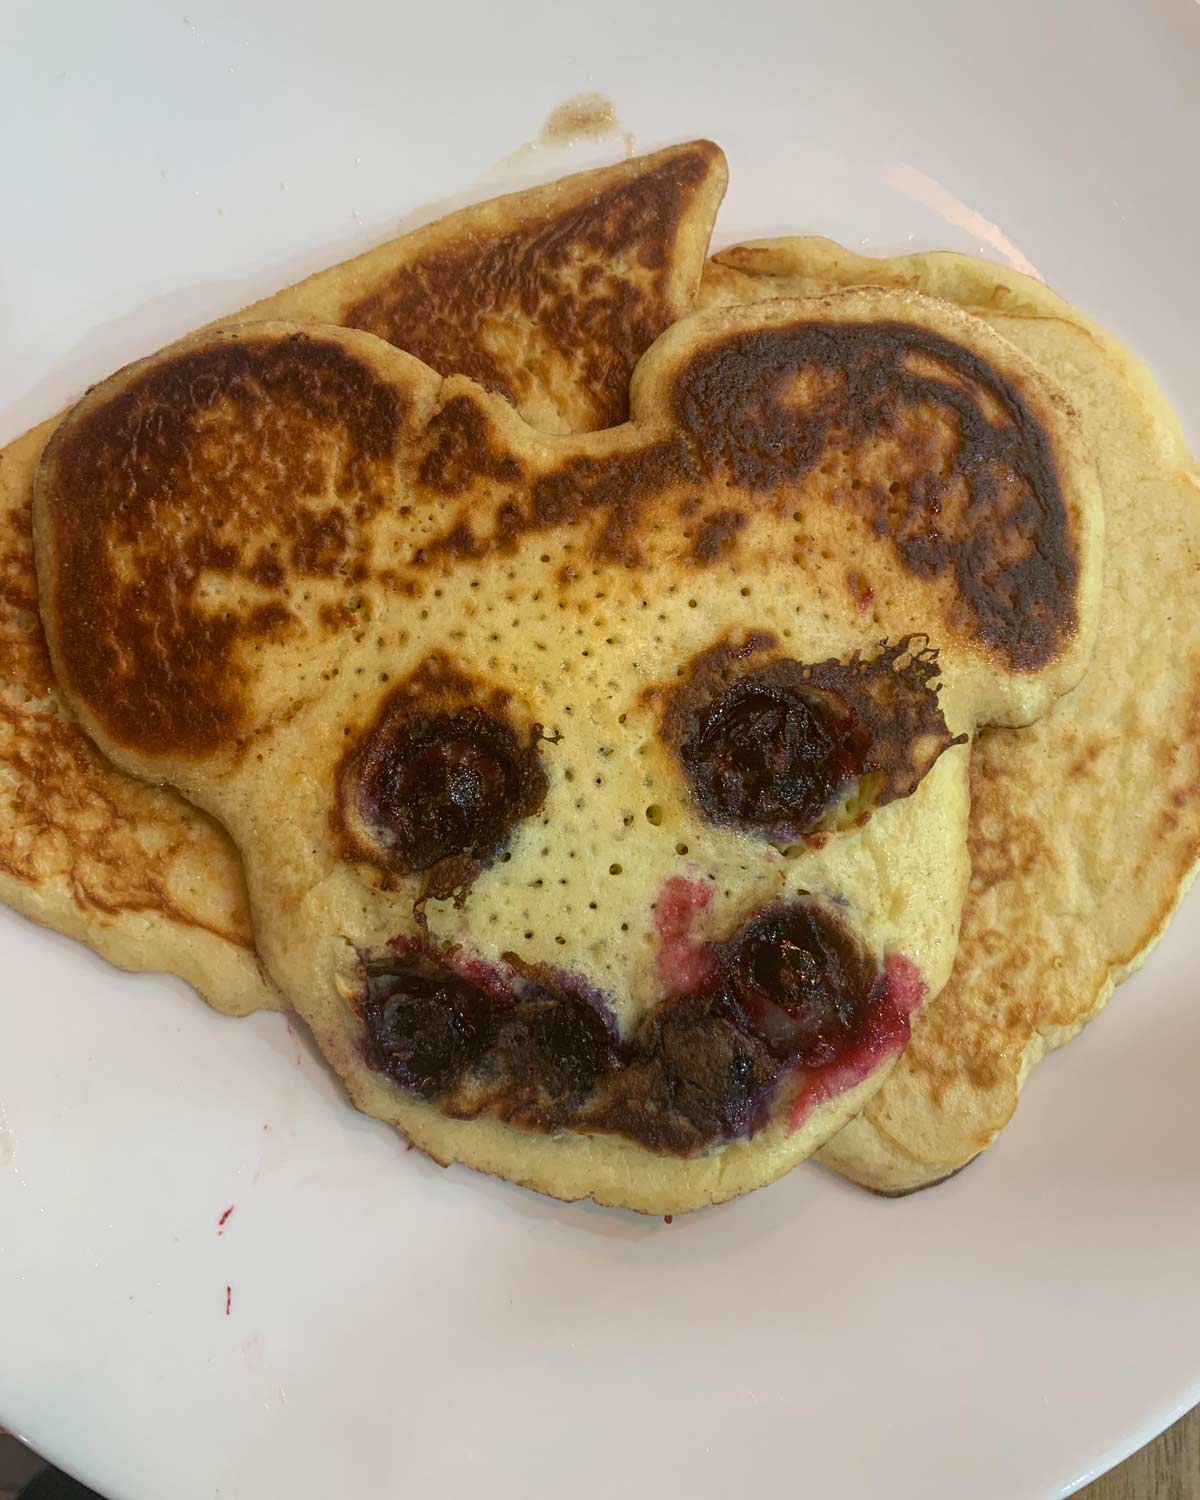 Made my kid a Mickey Mouse pancake